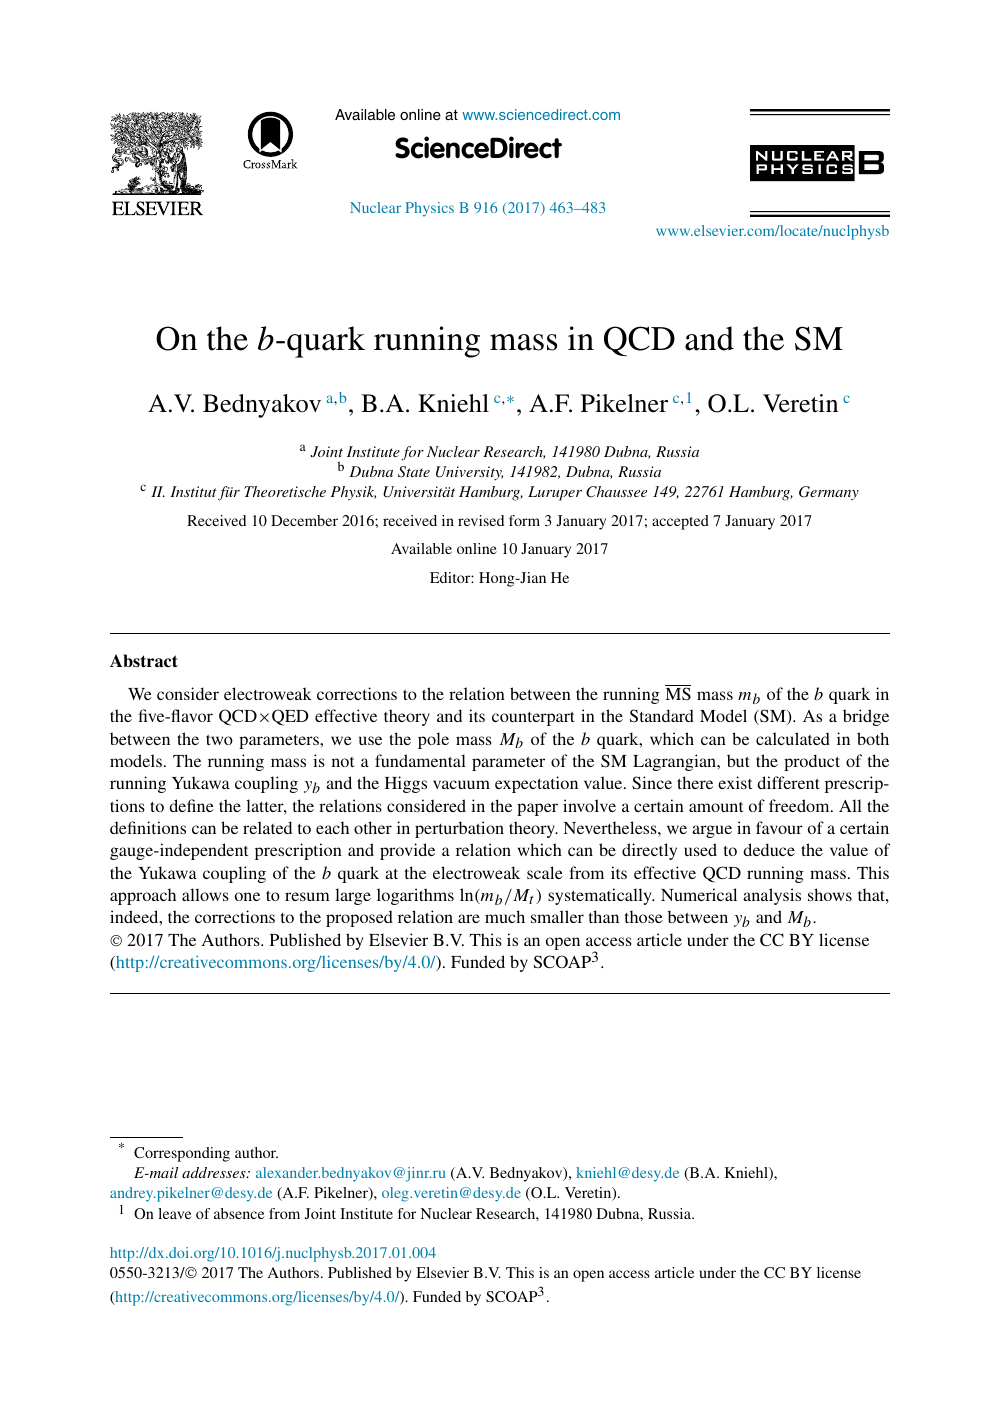 On The B Quark Running Mass In Qcd And The Sm Topic Of Research Paper In Physical Sciences Download Scholarly Article Pdf And Read For Free On Cyberleninka Open Science Hub